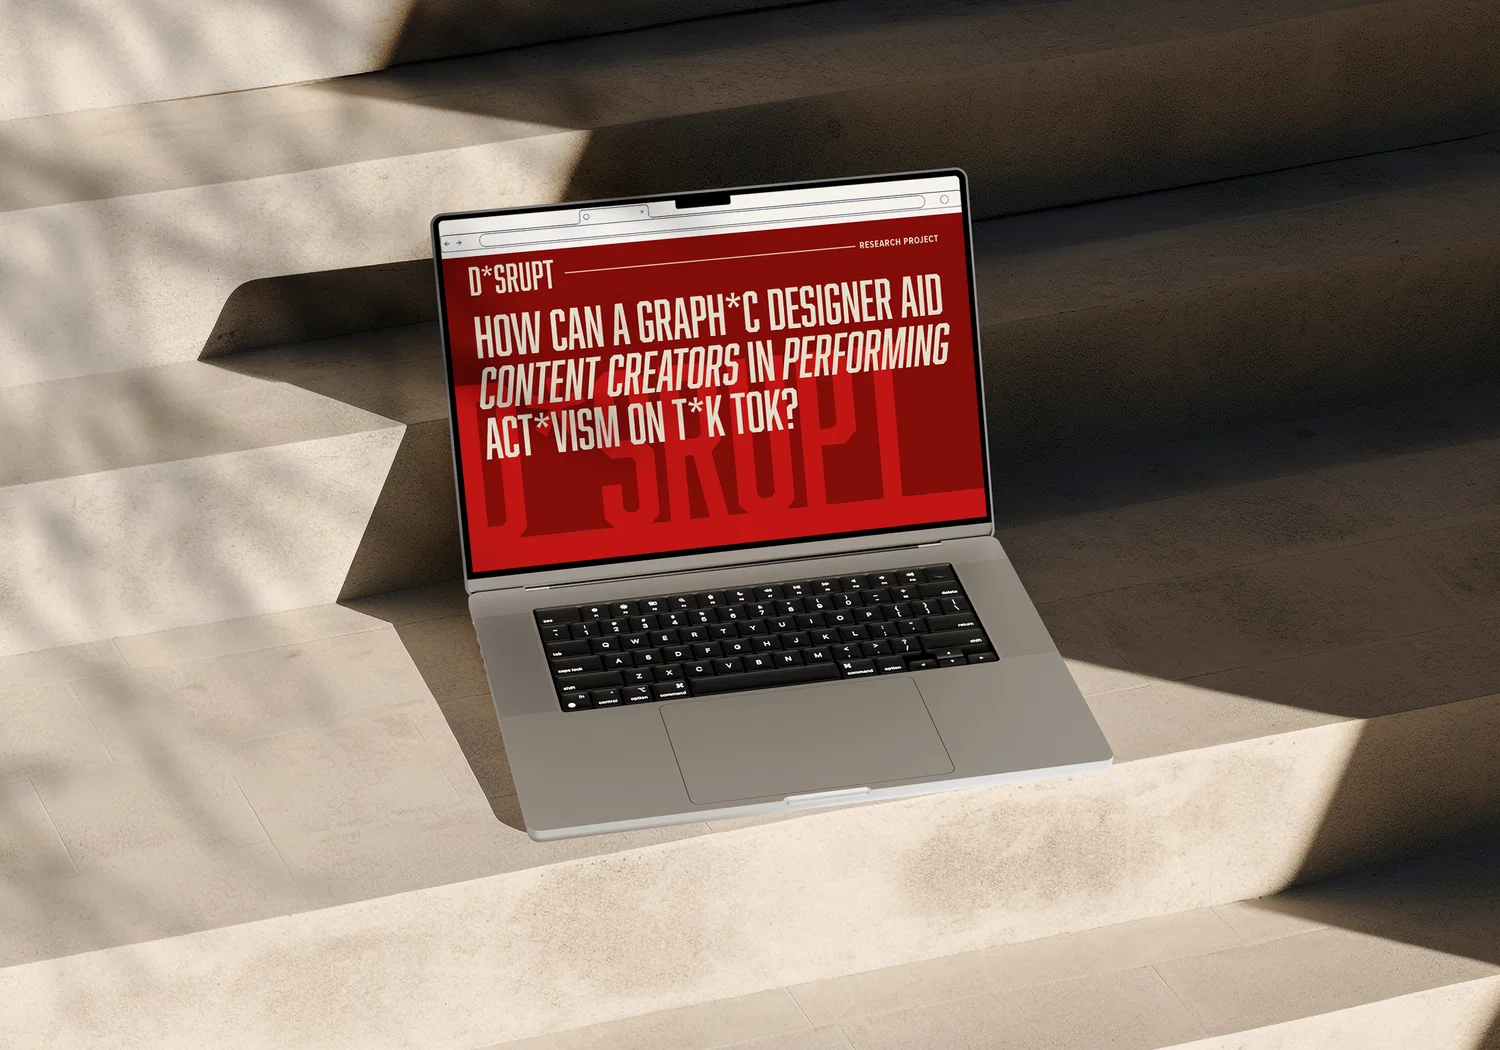 Laptop that shows a website with the title "how can a graphic designer aid content creators in performing activism online?"